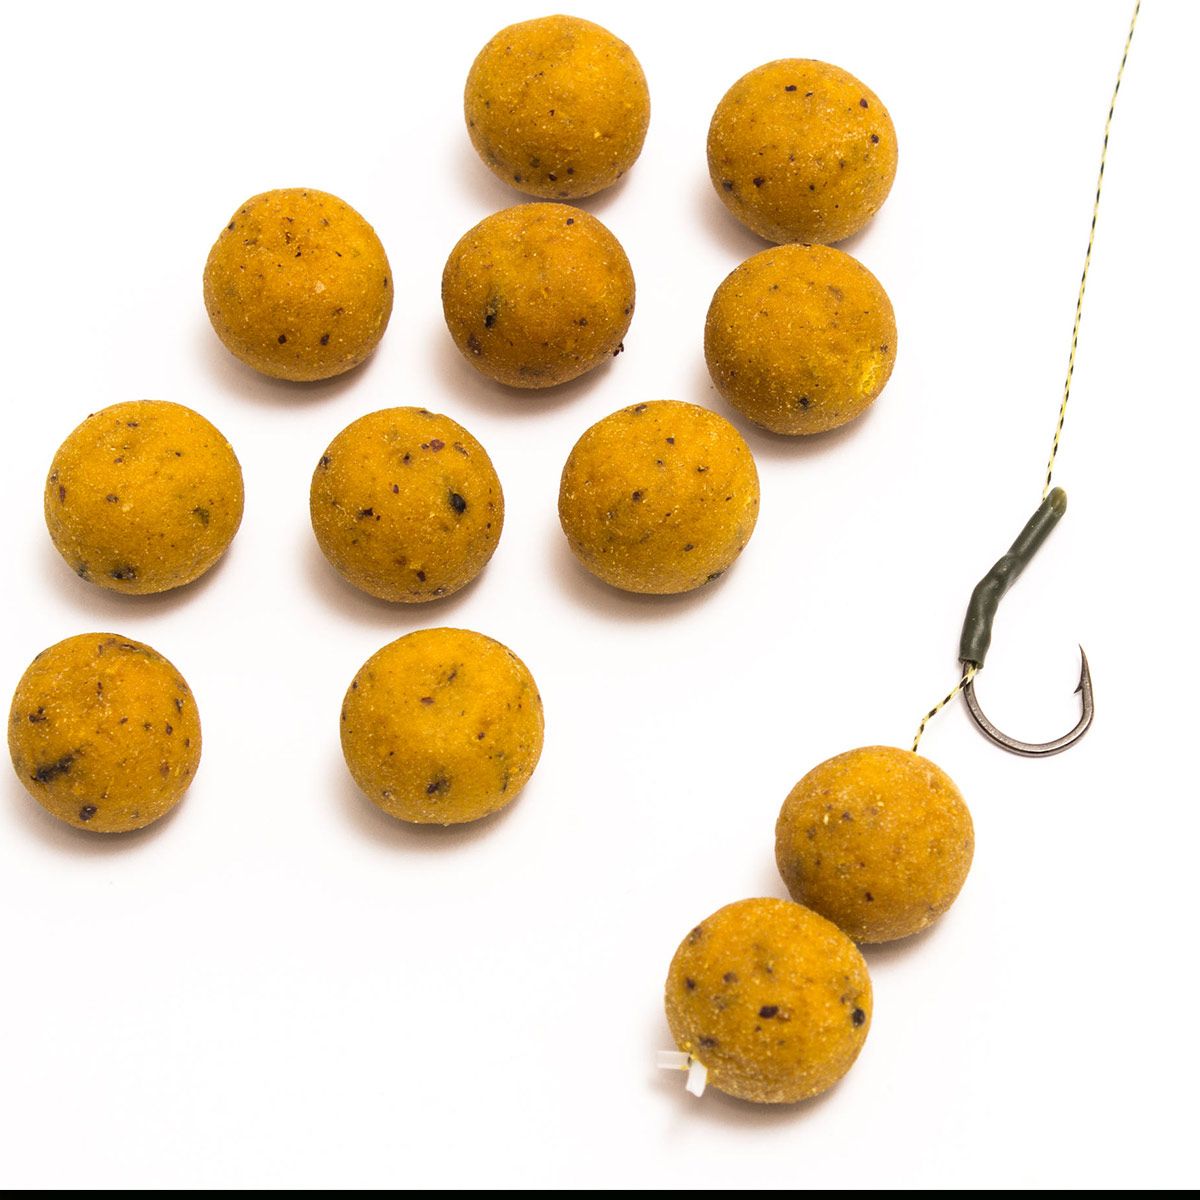 Fish Bait / Boilies Machine and Production Solution